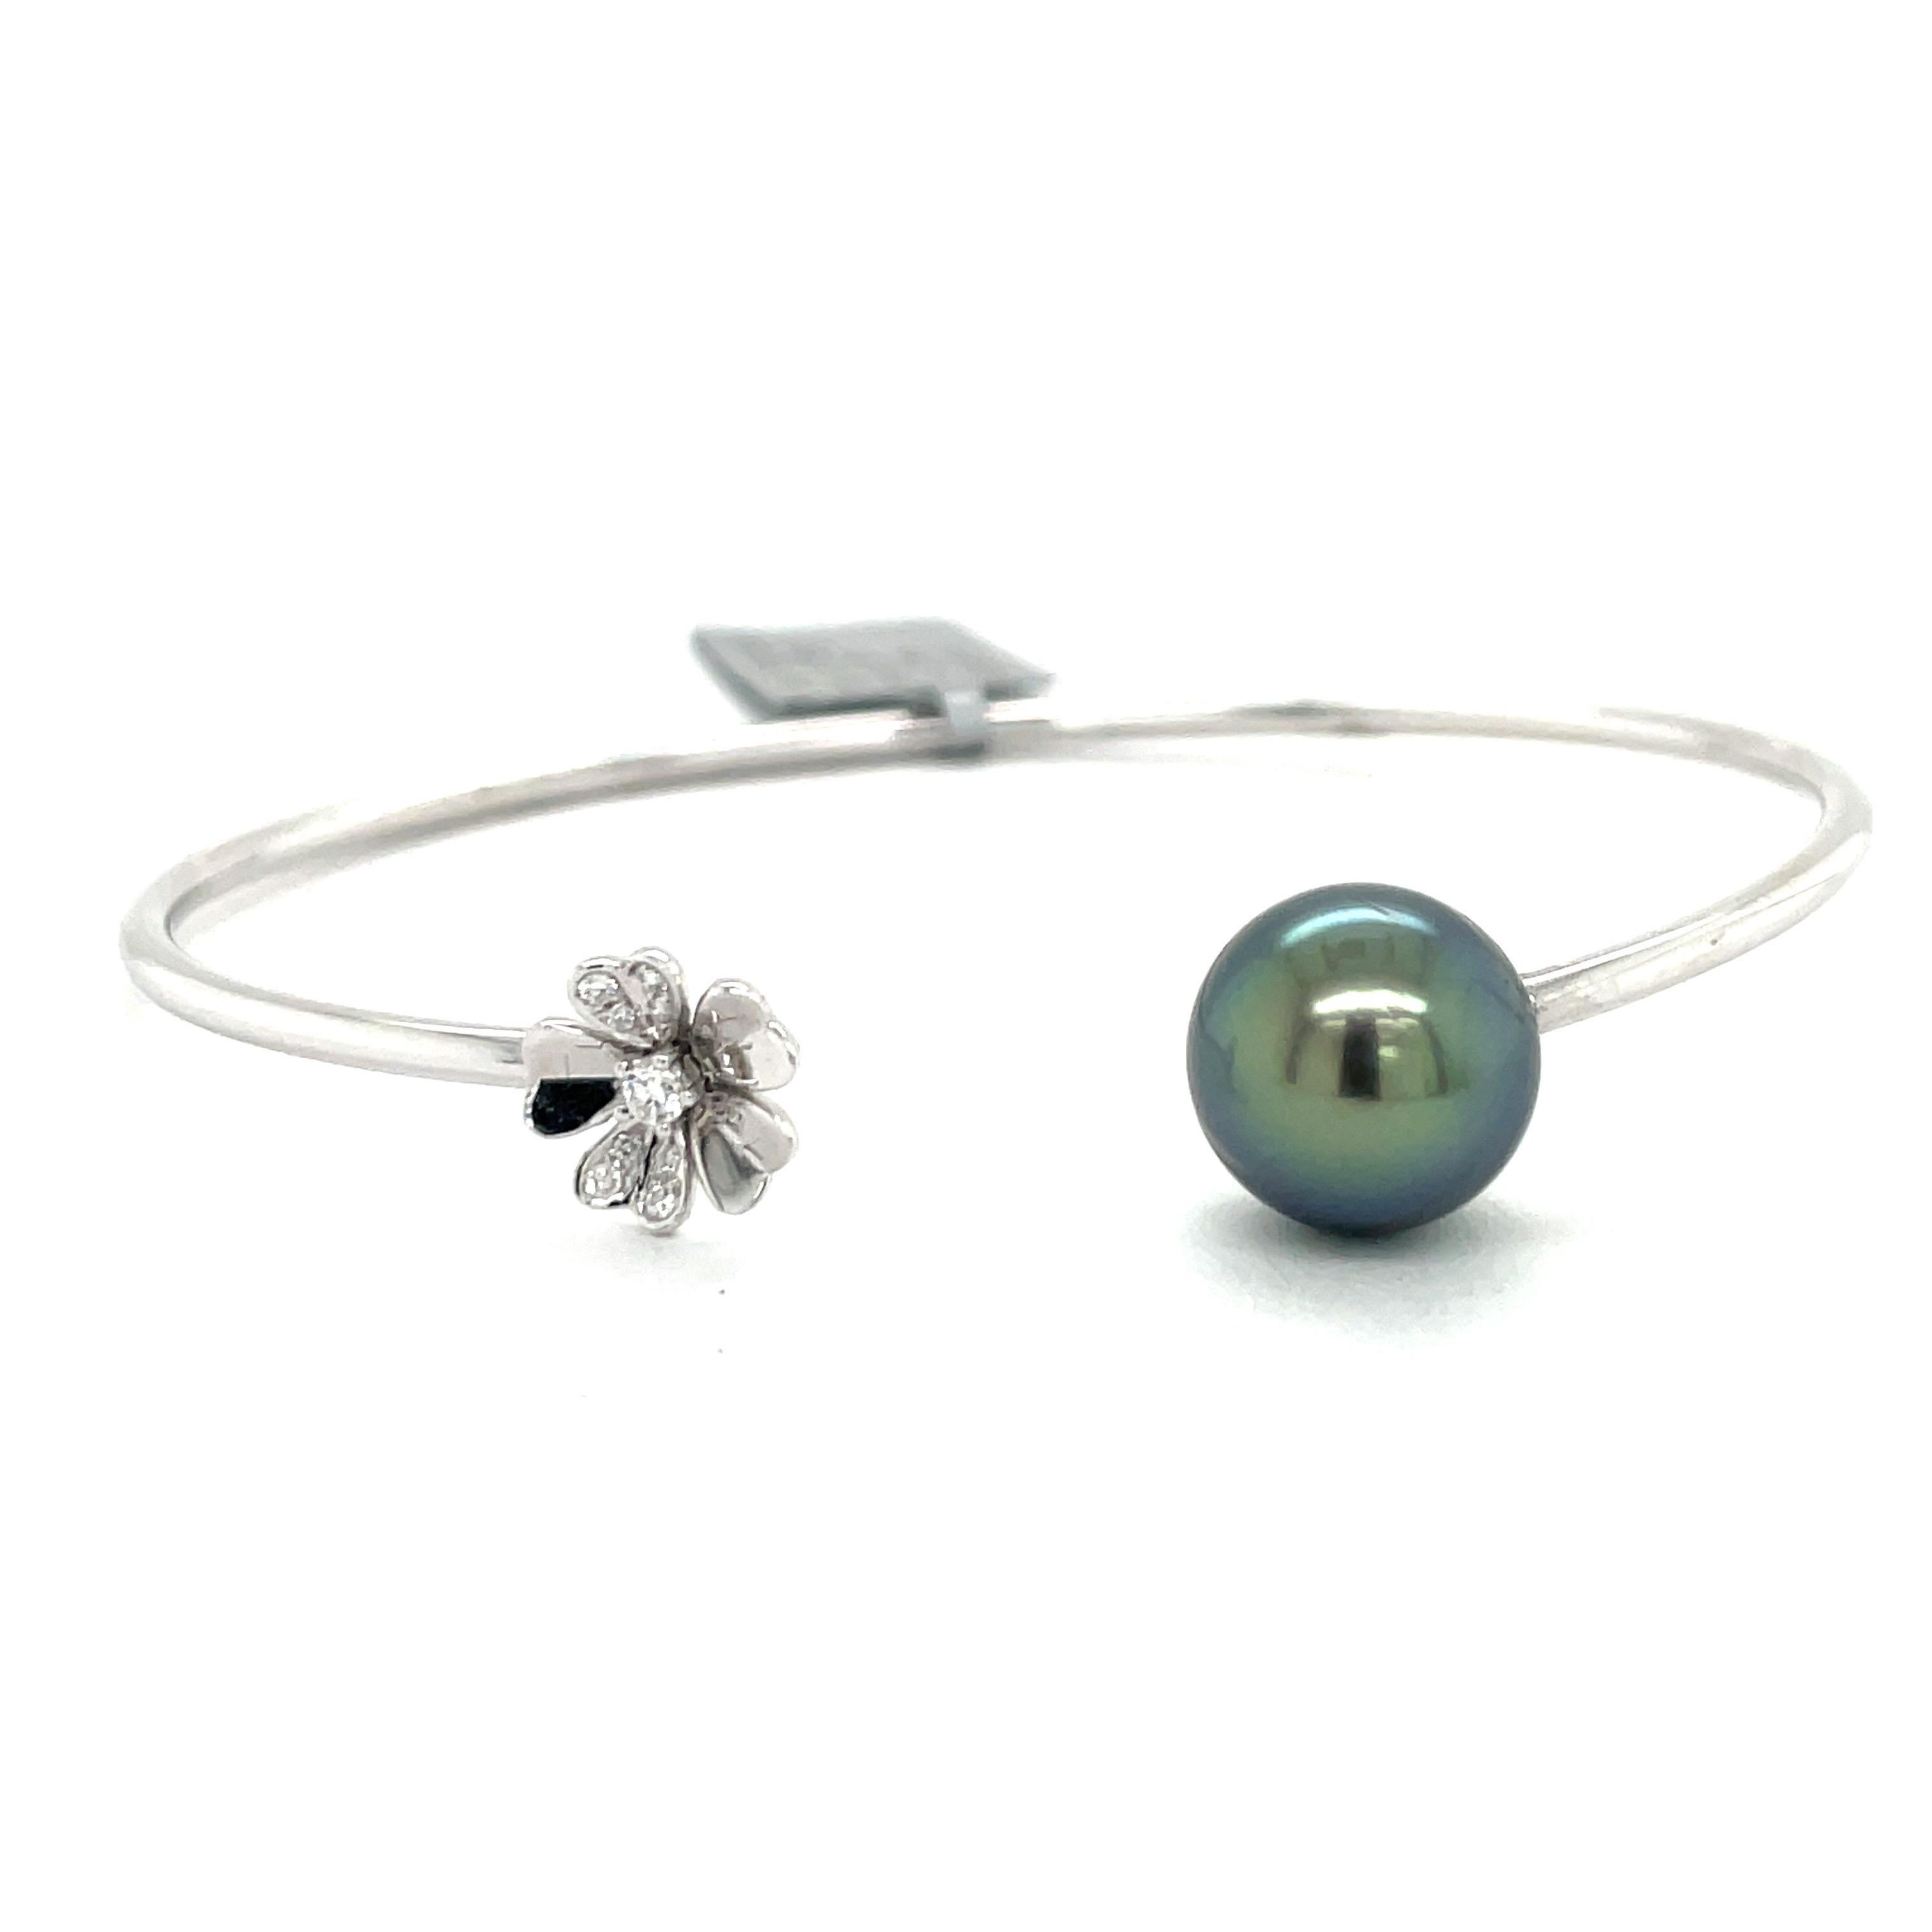 18 Karat White Gold open cuff bangle featuring one Tahitian Pearl measuring 11-12 MM and one floral motif containing 9 diamonds weighing 0.07 Carats.
